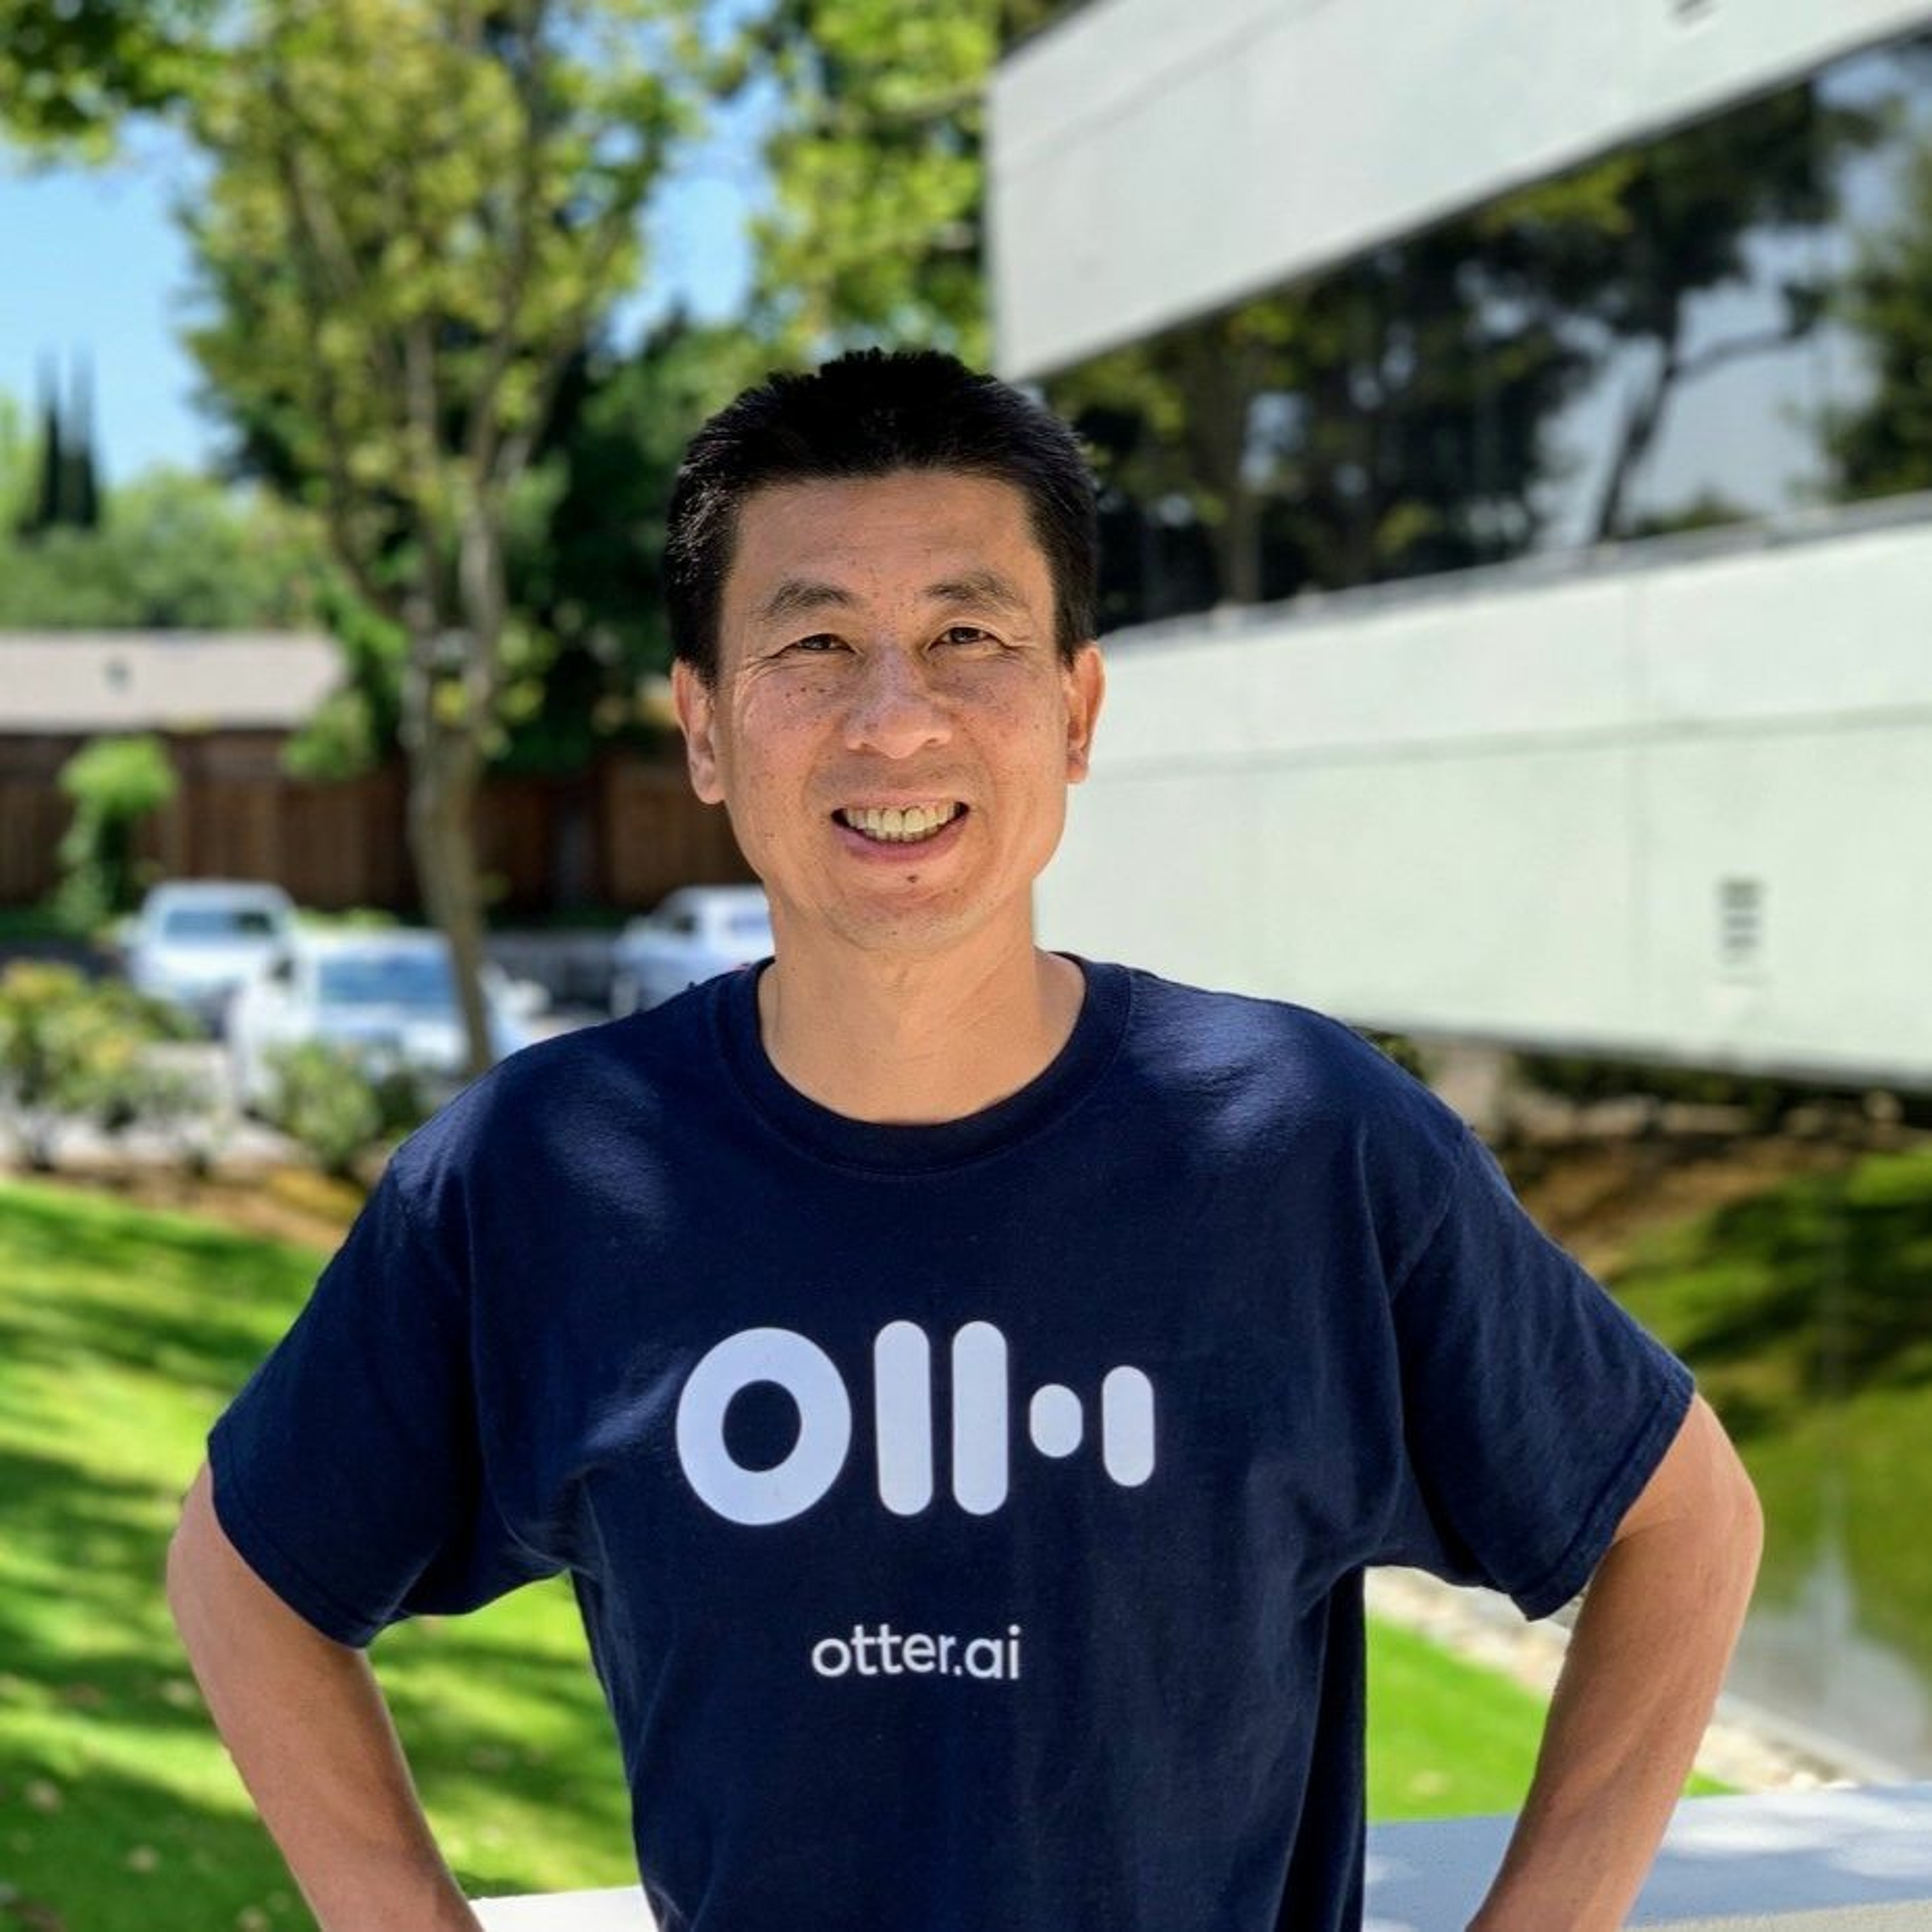 Otter.ai CEO Sam Liang on Bringing Live Captions to a Meeting Near You - Ep. 134